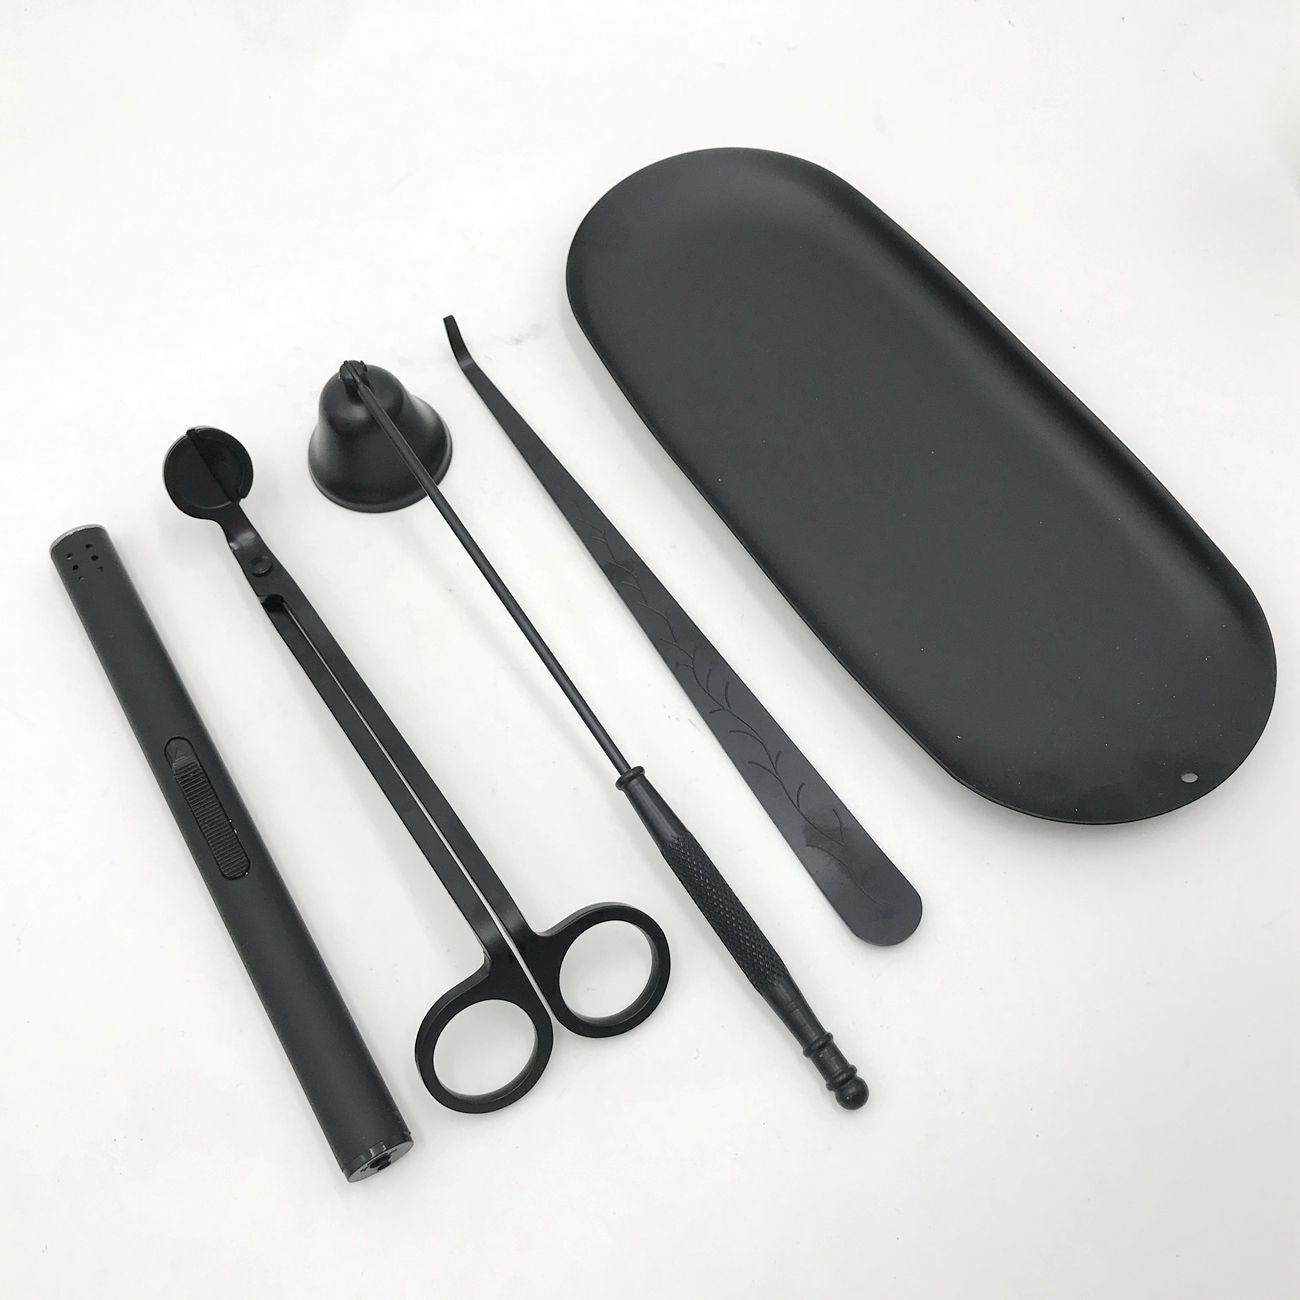 Household Black Scented Candle Cutter, Candle Extinguisher, Candle Extinguisher Hook, And Four-Piece Tool